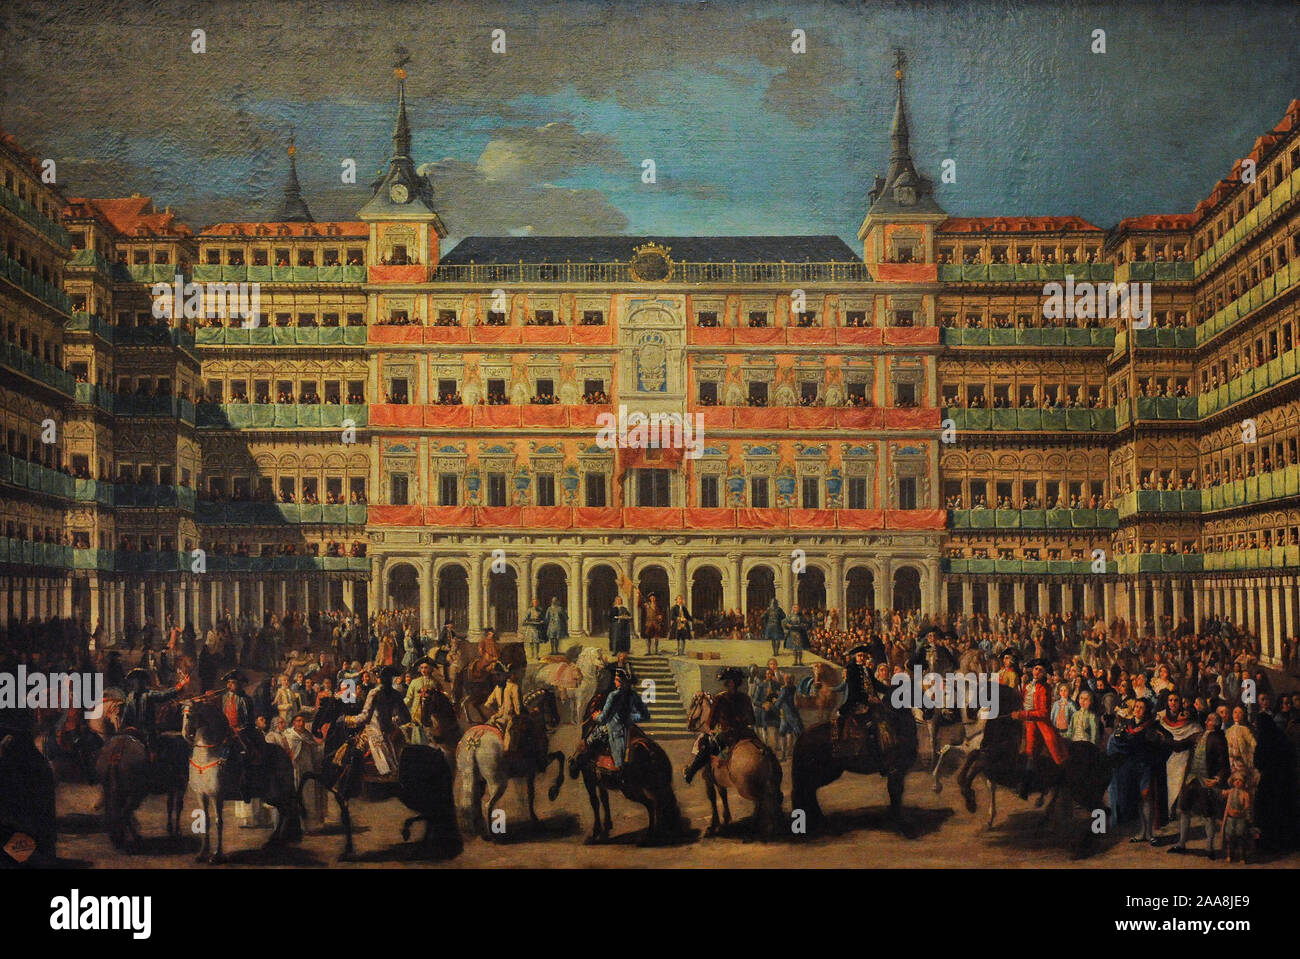 Ascribed to Lorenzo de Quiros (1717-1789). Spanish painter. Embellishment of the Plaza Mayor on the occasion of the entry of Charles III in Madrid, ca.1760. History Museum. Madrid. Spain. (On loan, San Fernando Royal Academy of Fine Arts, Madrid). History Museum. Madrid. Spain. Stock Photo